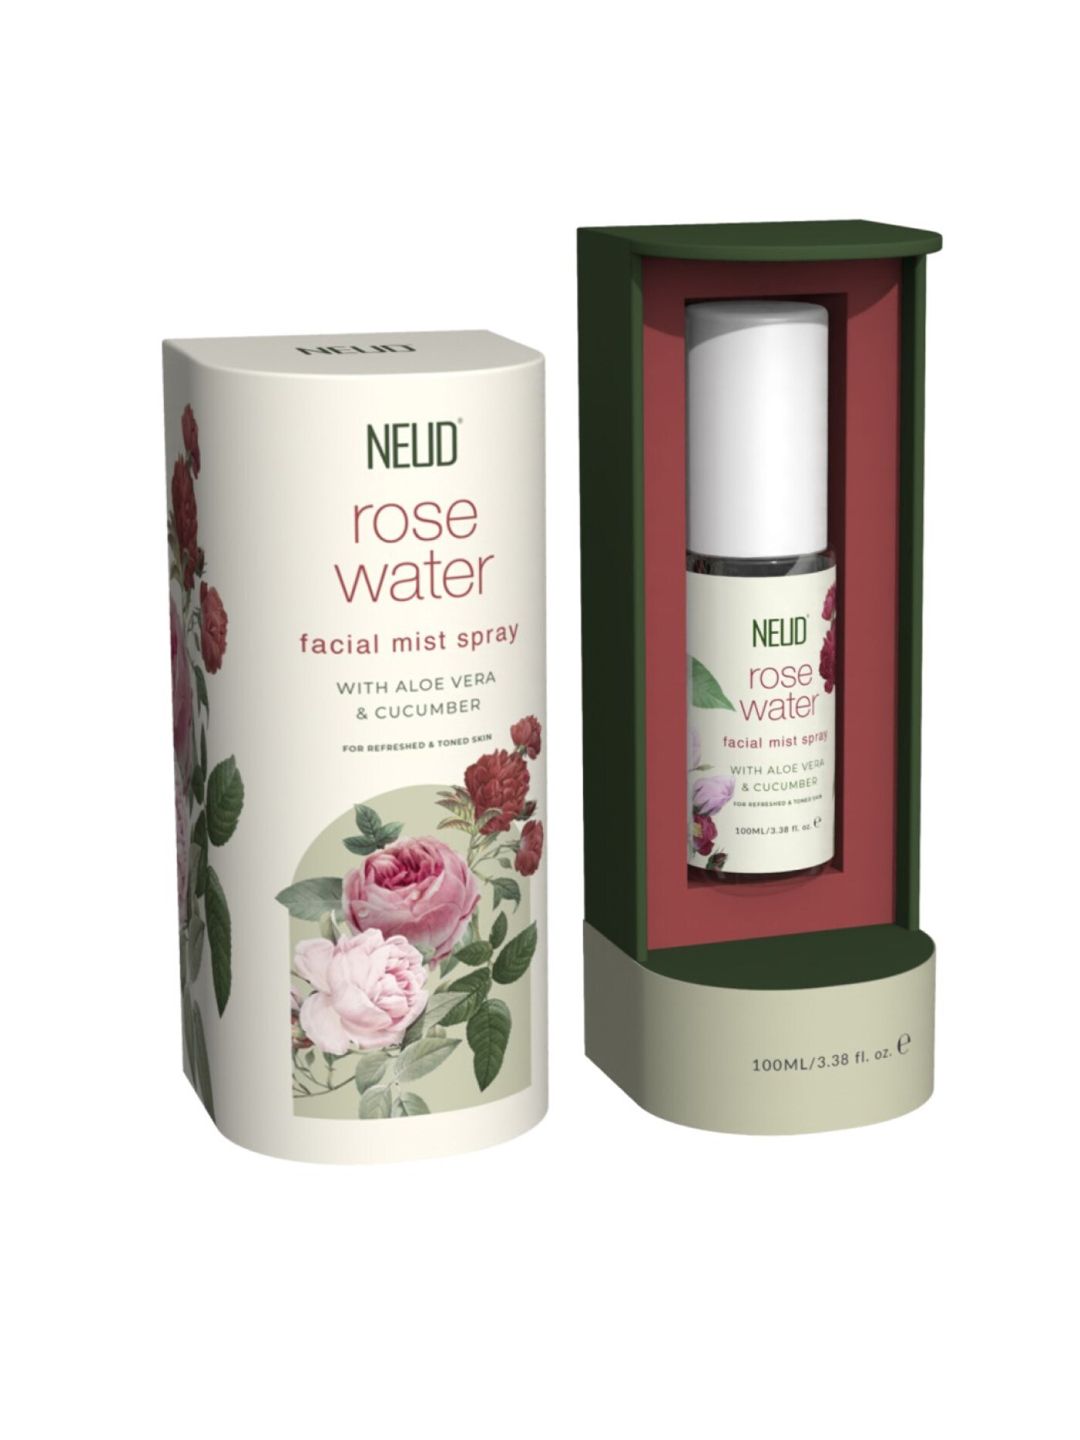 NEUD Rose Water Facial Mist Spray with Aloevera & Cucumber 100 ml Price in India